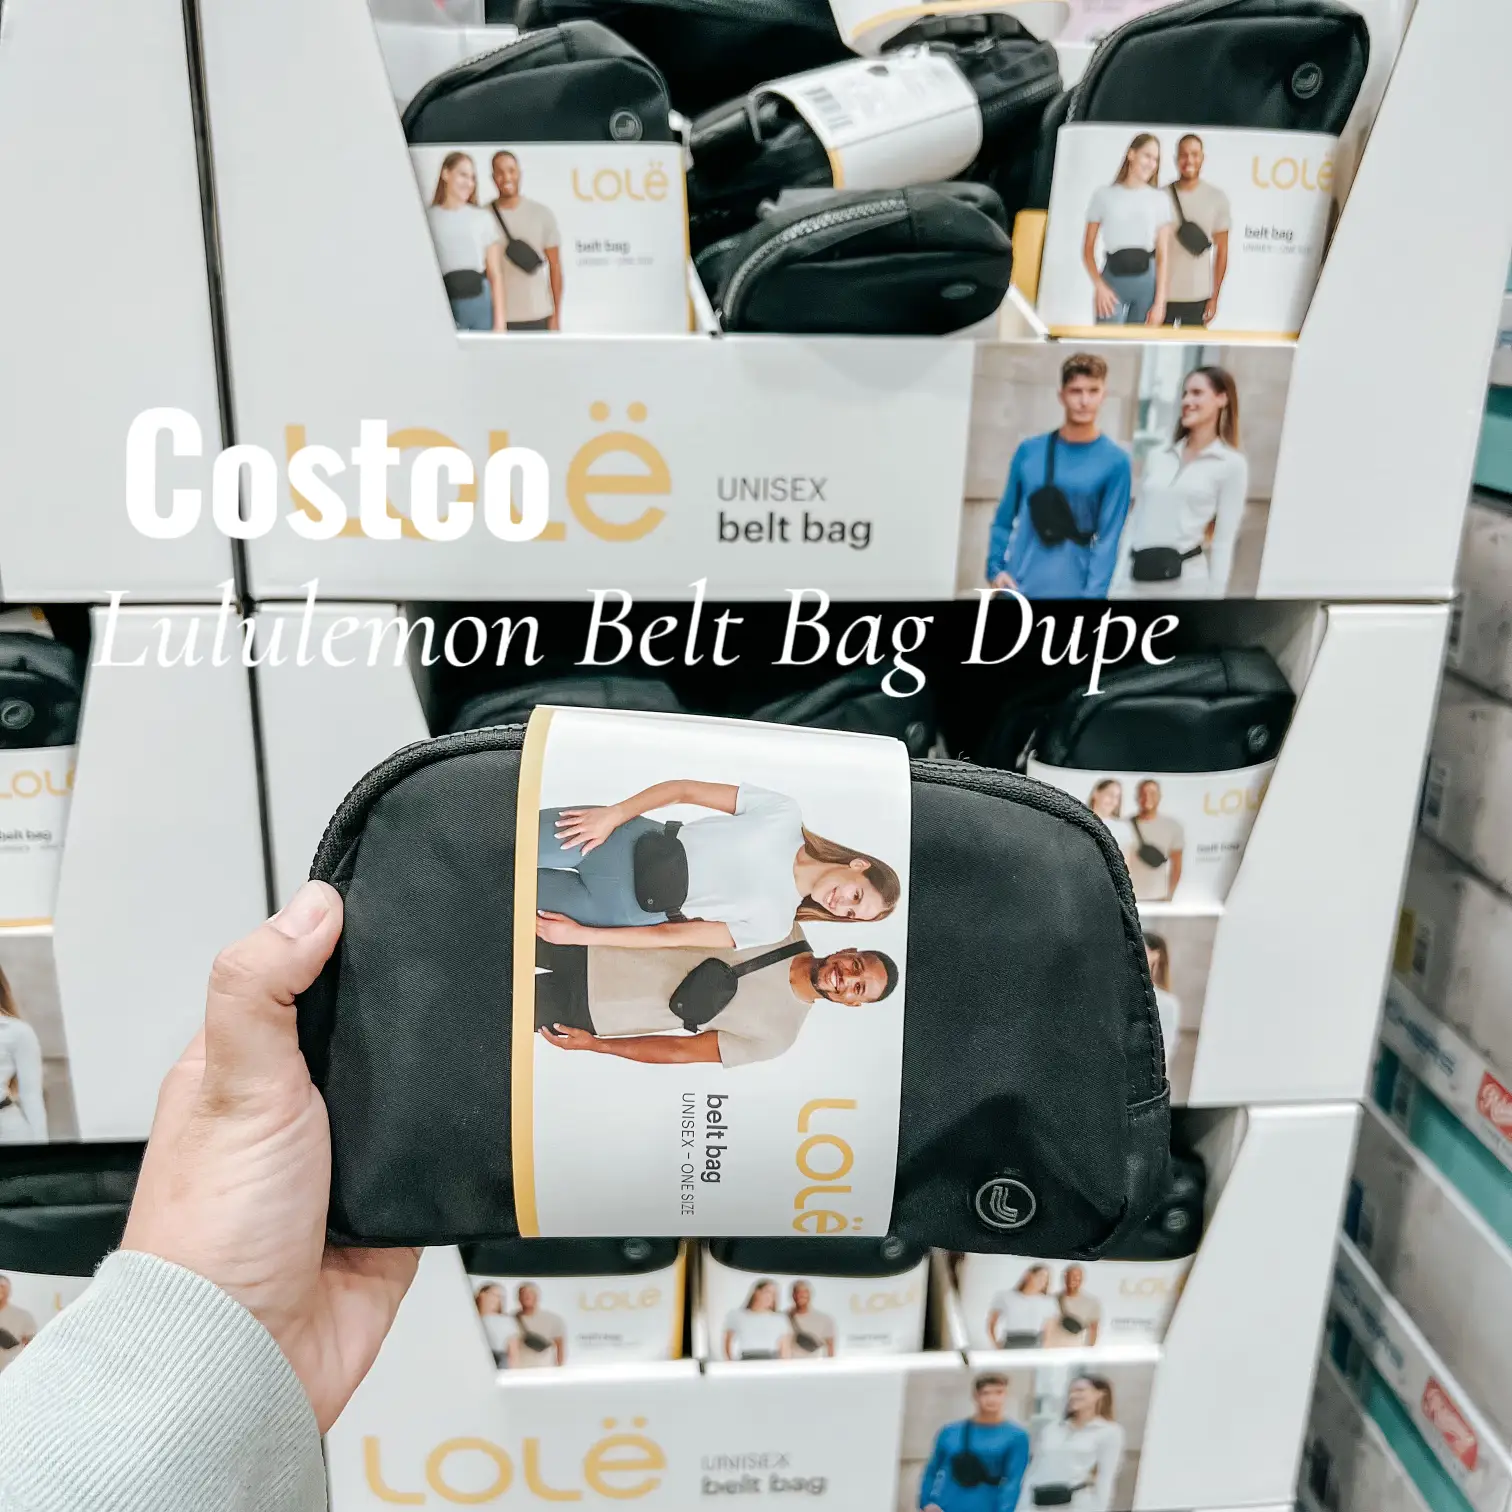 Lululemon belt bag dupe at Costco!, Gallery posted by SaverSisters